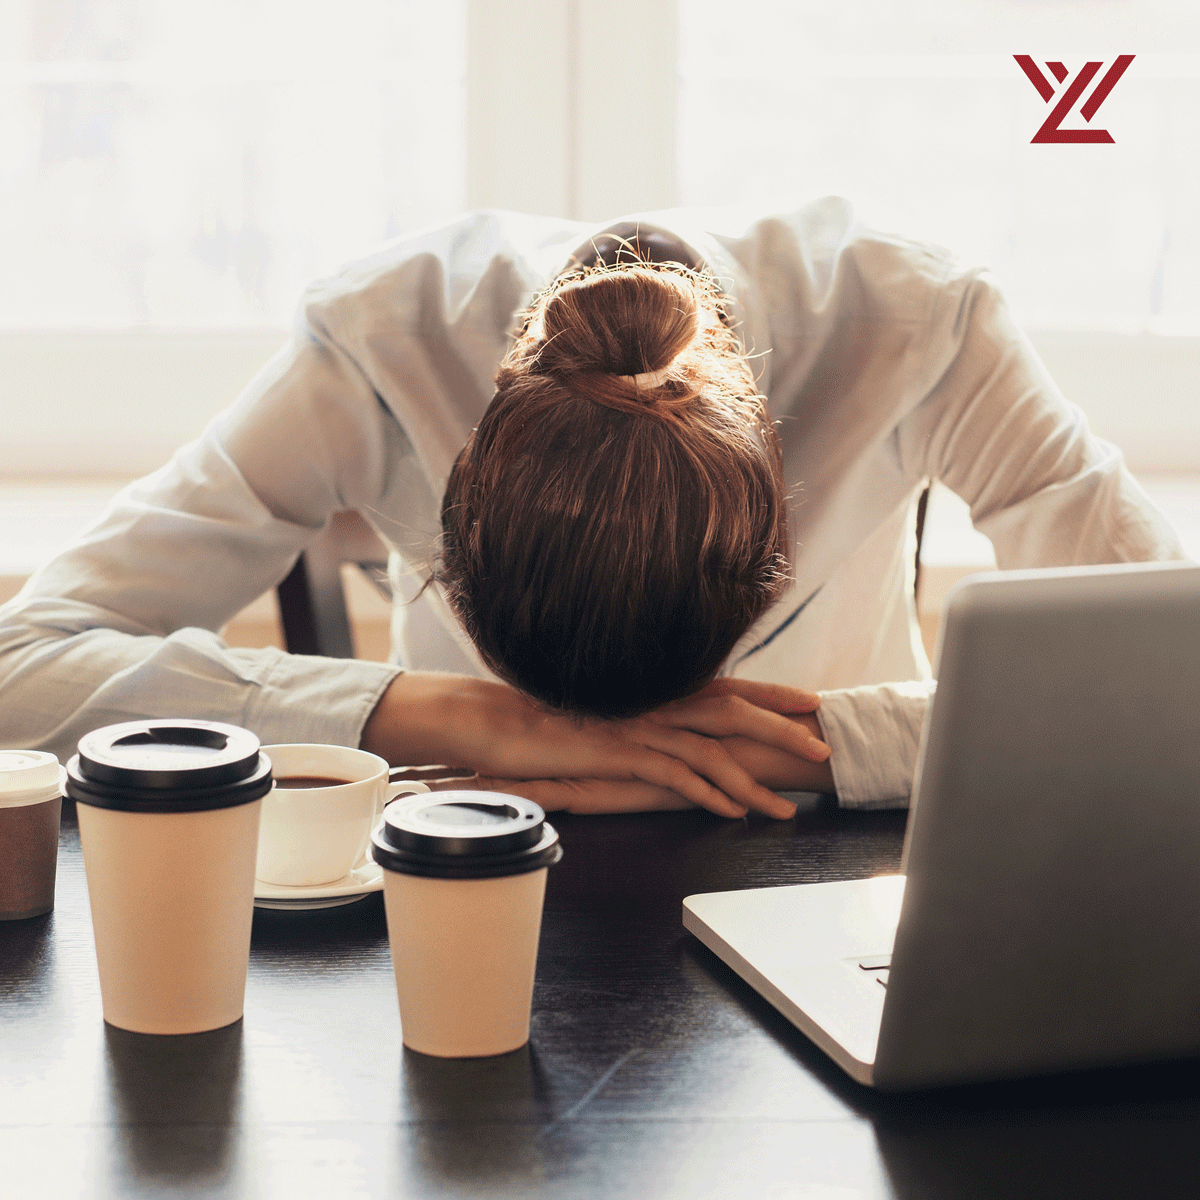 If there's one thing we can't stand, it's employee rights violations. Our attorneys possess the expertise needed to help advocate for employees, including cases concerning wage and hour disputes. walcheskeluzi.com/employment-pra… 

#WalcheskeLuzi #EmploymentLaw #WageHourViolations